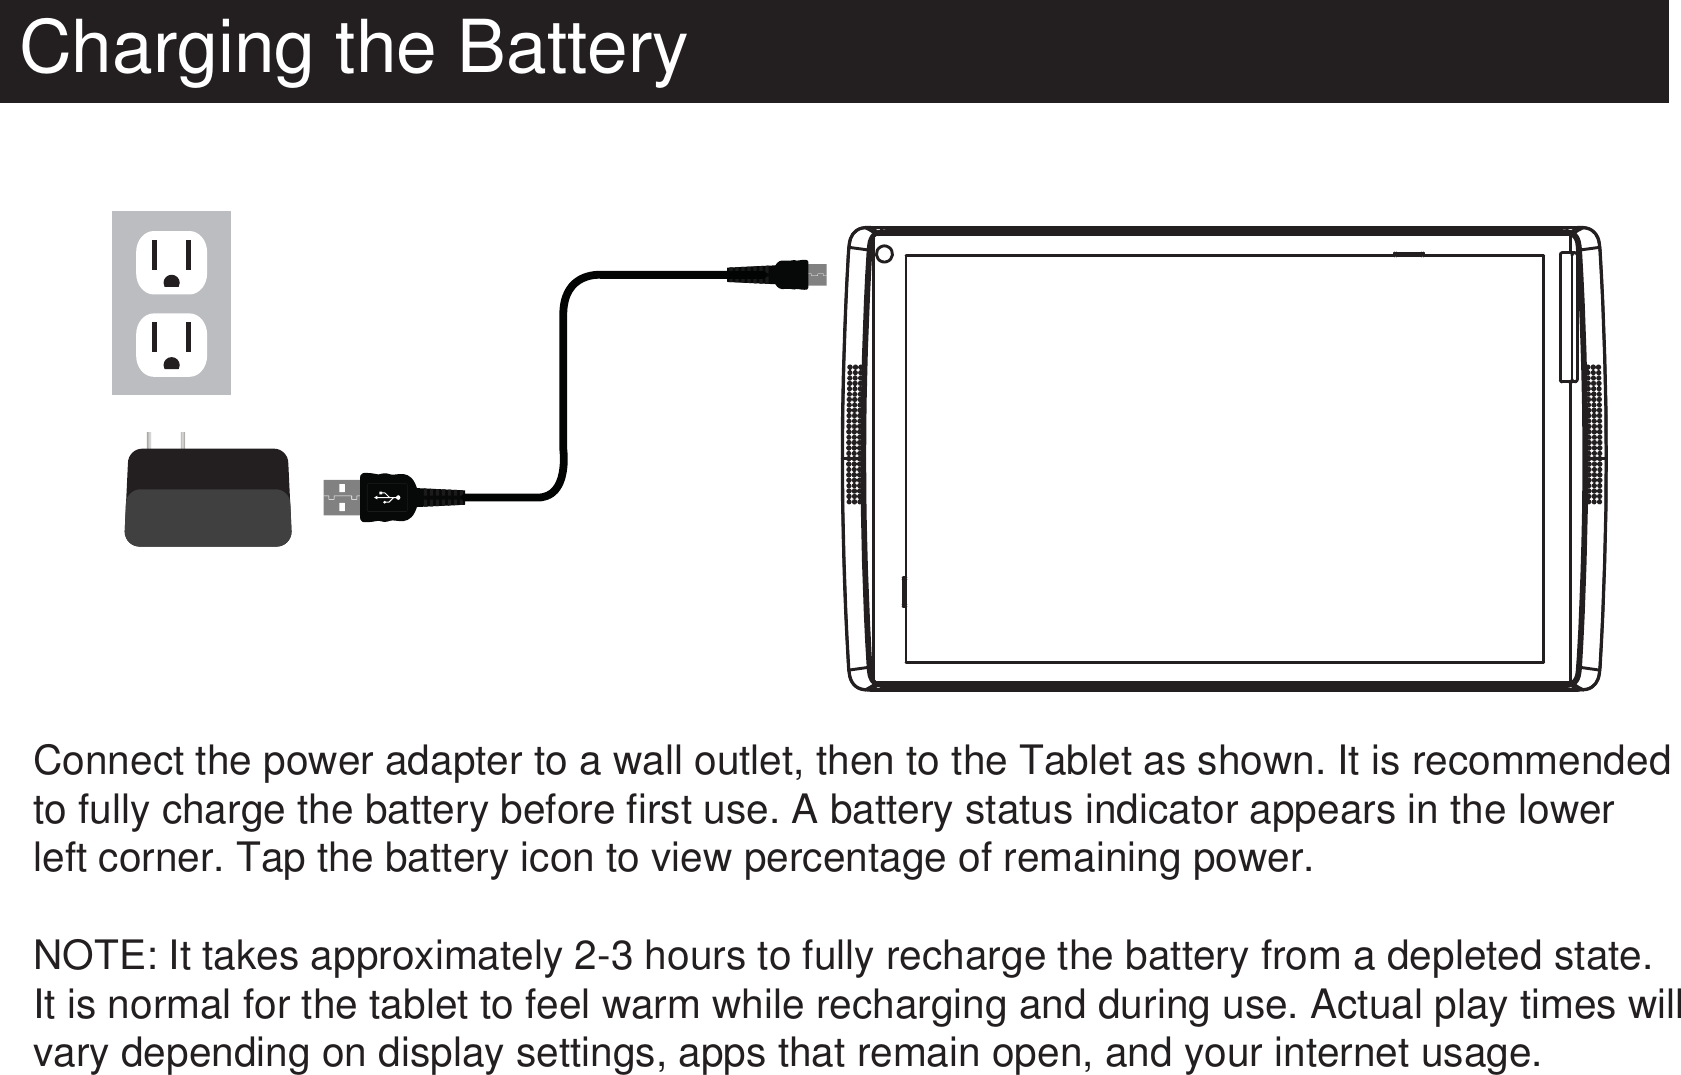 Charging the BatteryConnect the power adapter to a wall outlet, then to the Tablet as shown. It is recommended to fully charge the battery before first use. A battery status indicator appears in the lower left corner. Tap the battery icon to view percentage of remaining power.NOTE: It takes approximately 2-3 hours to fully recharge the battery from a depleted state. It is normal for the tablet to feel warm while recharging and during use. Actual play times will vary depending on display settings, apps that remain open, and your internet usage.